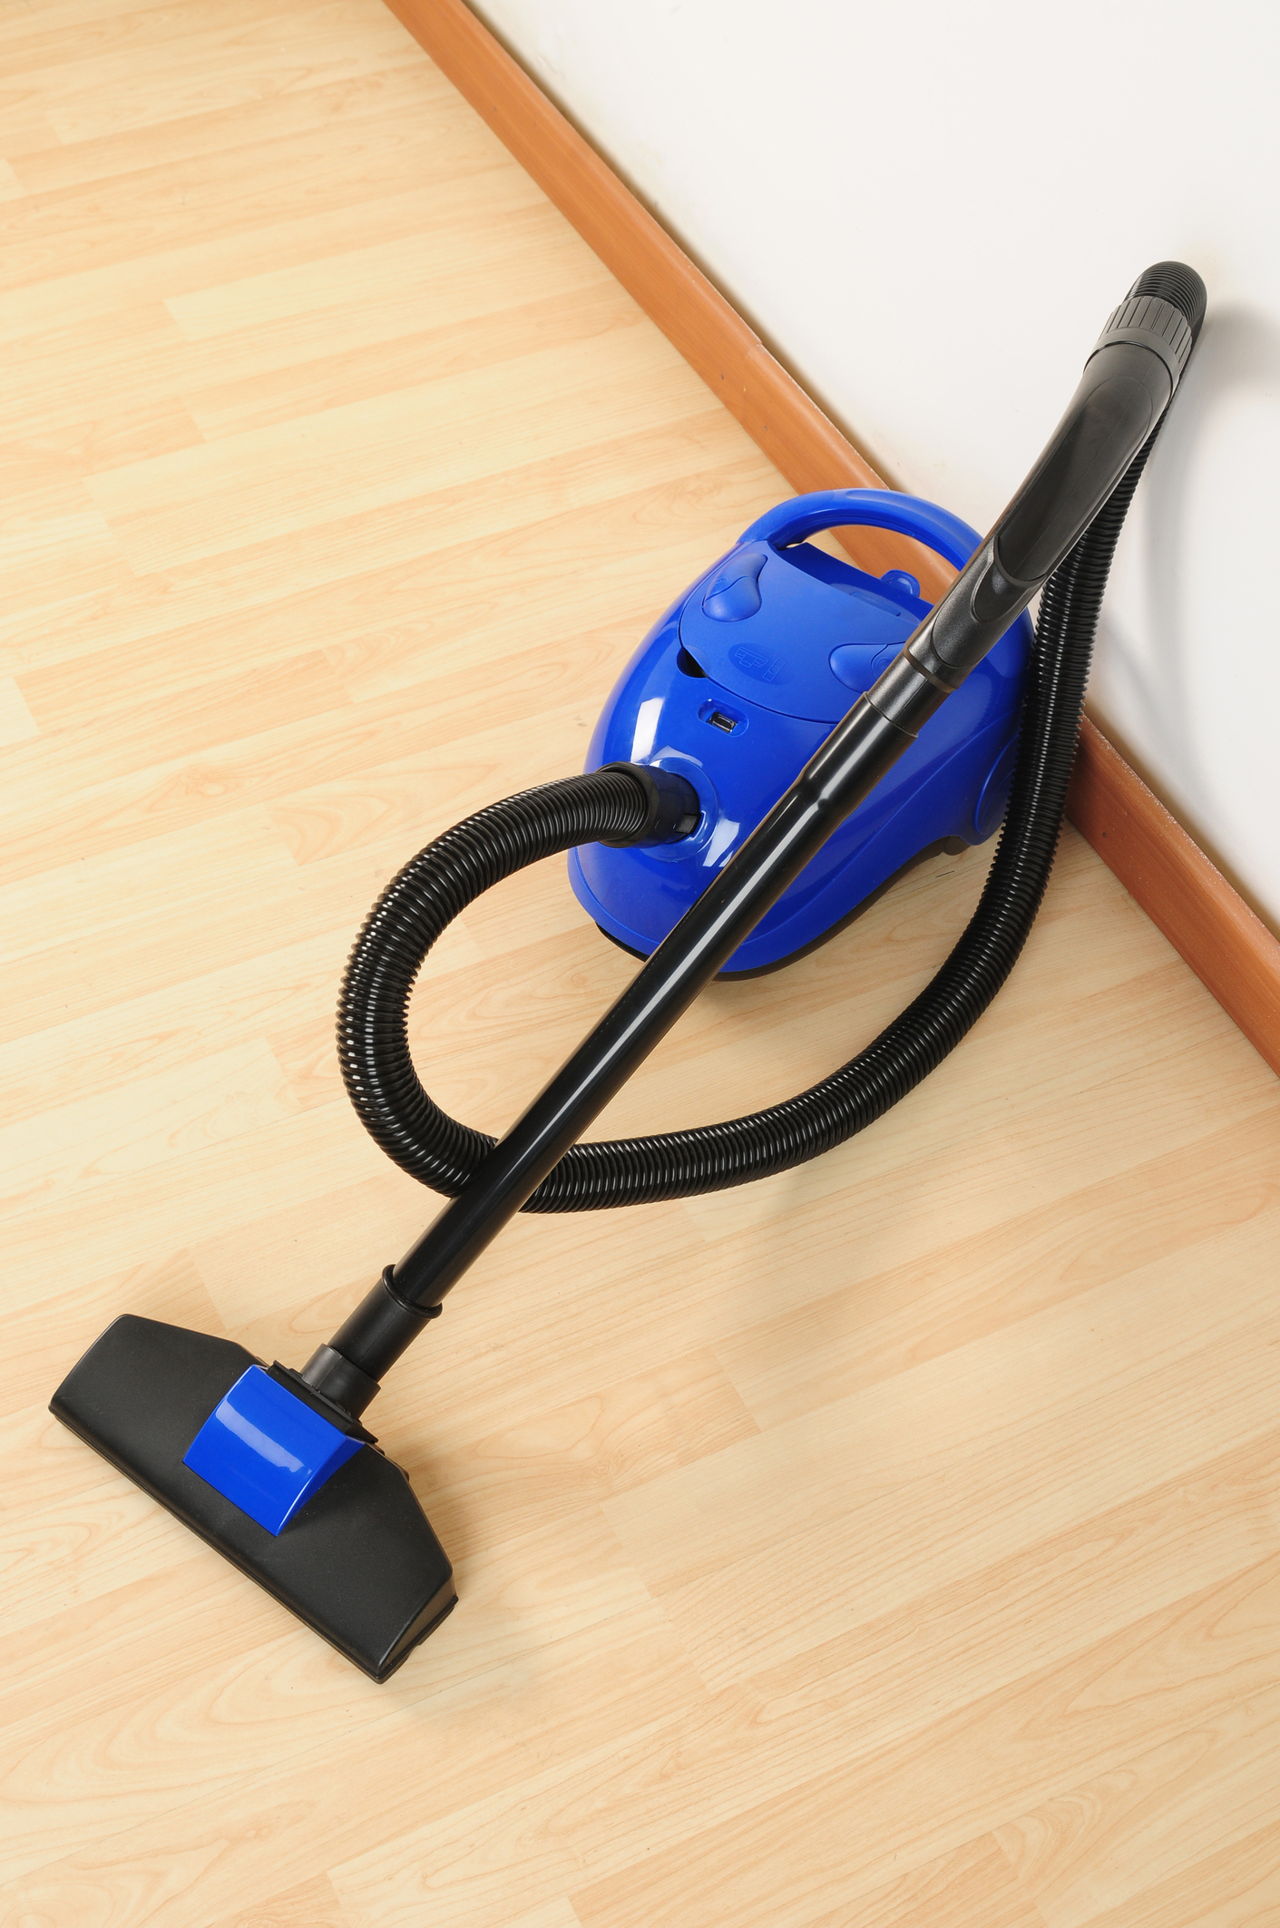 Clean Laminate Floors Without Streaking, Best Way To Clean Laminate Floors Without Streaking